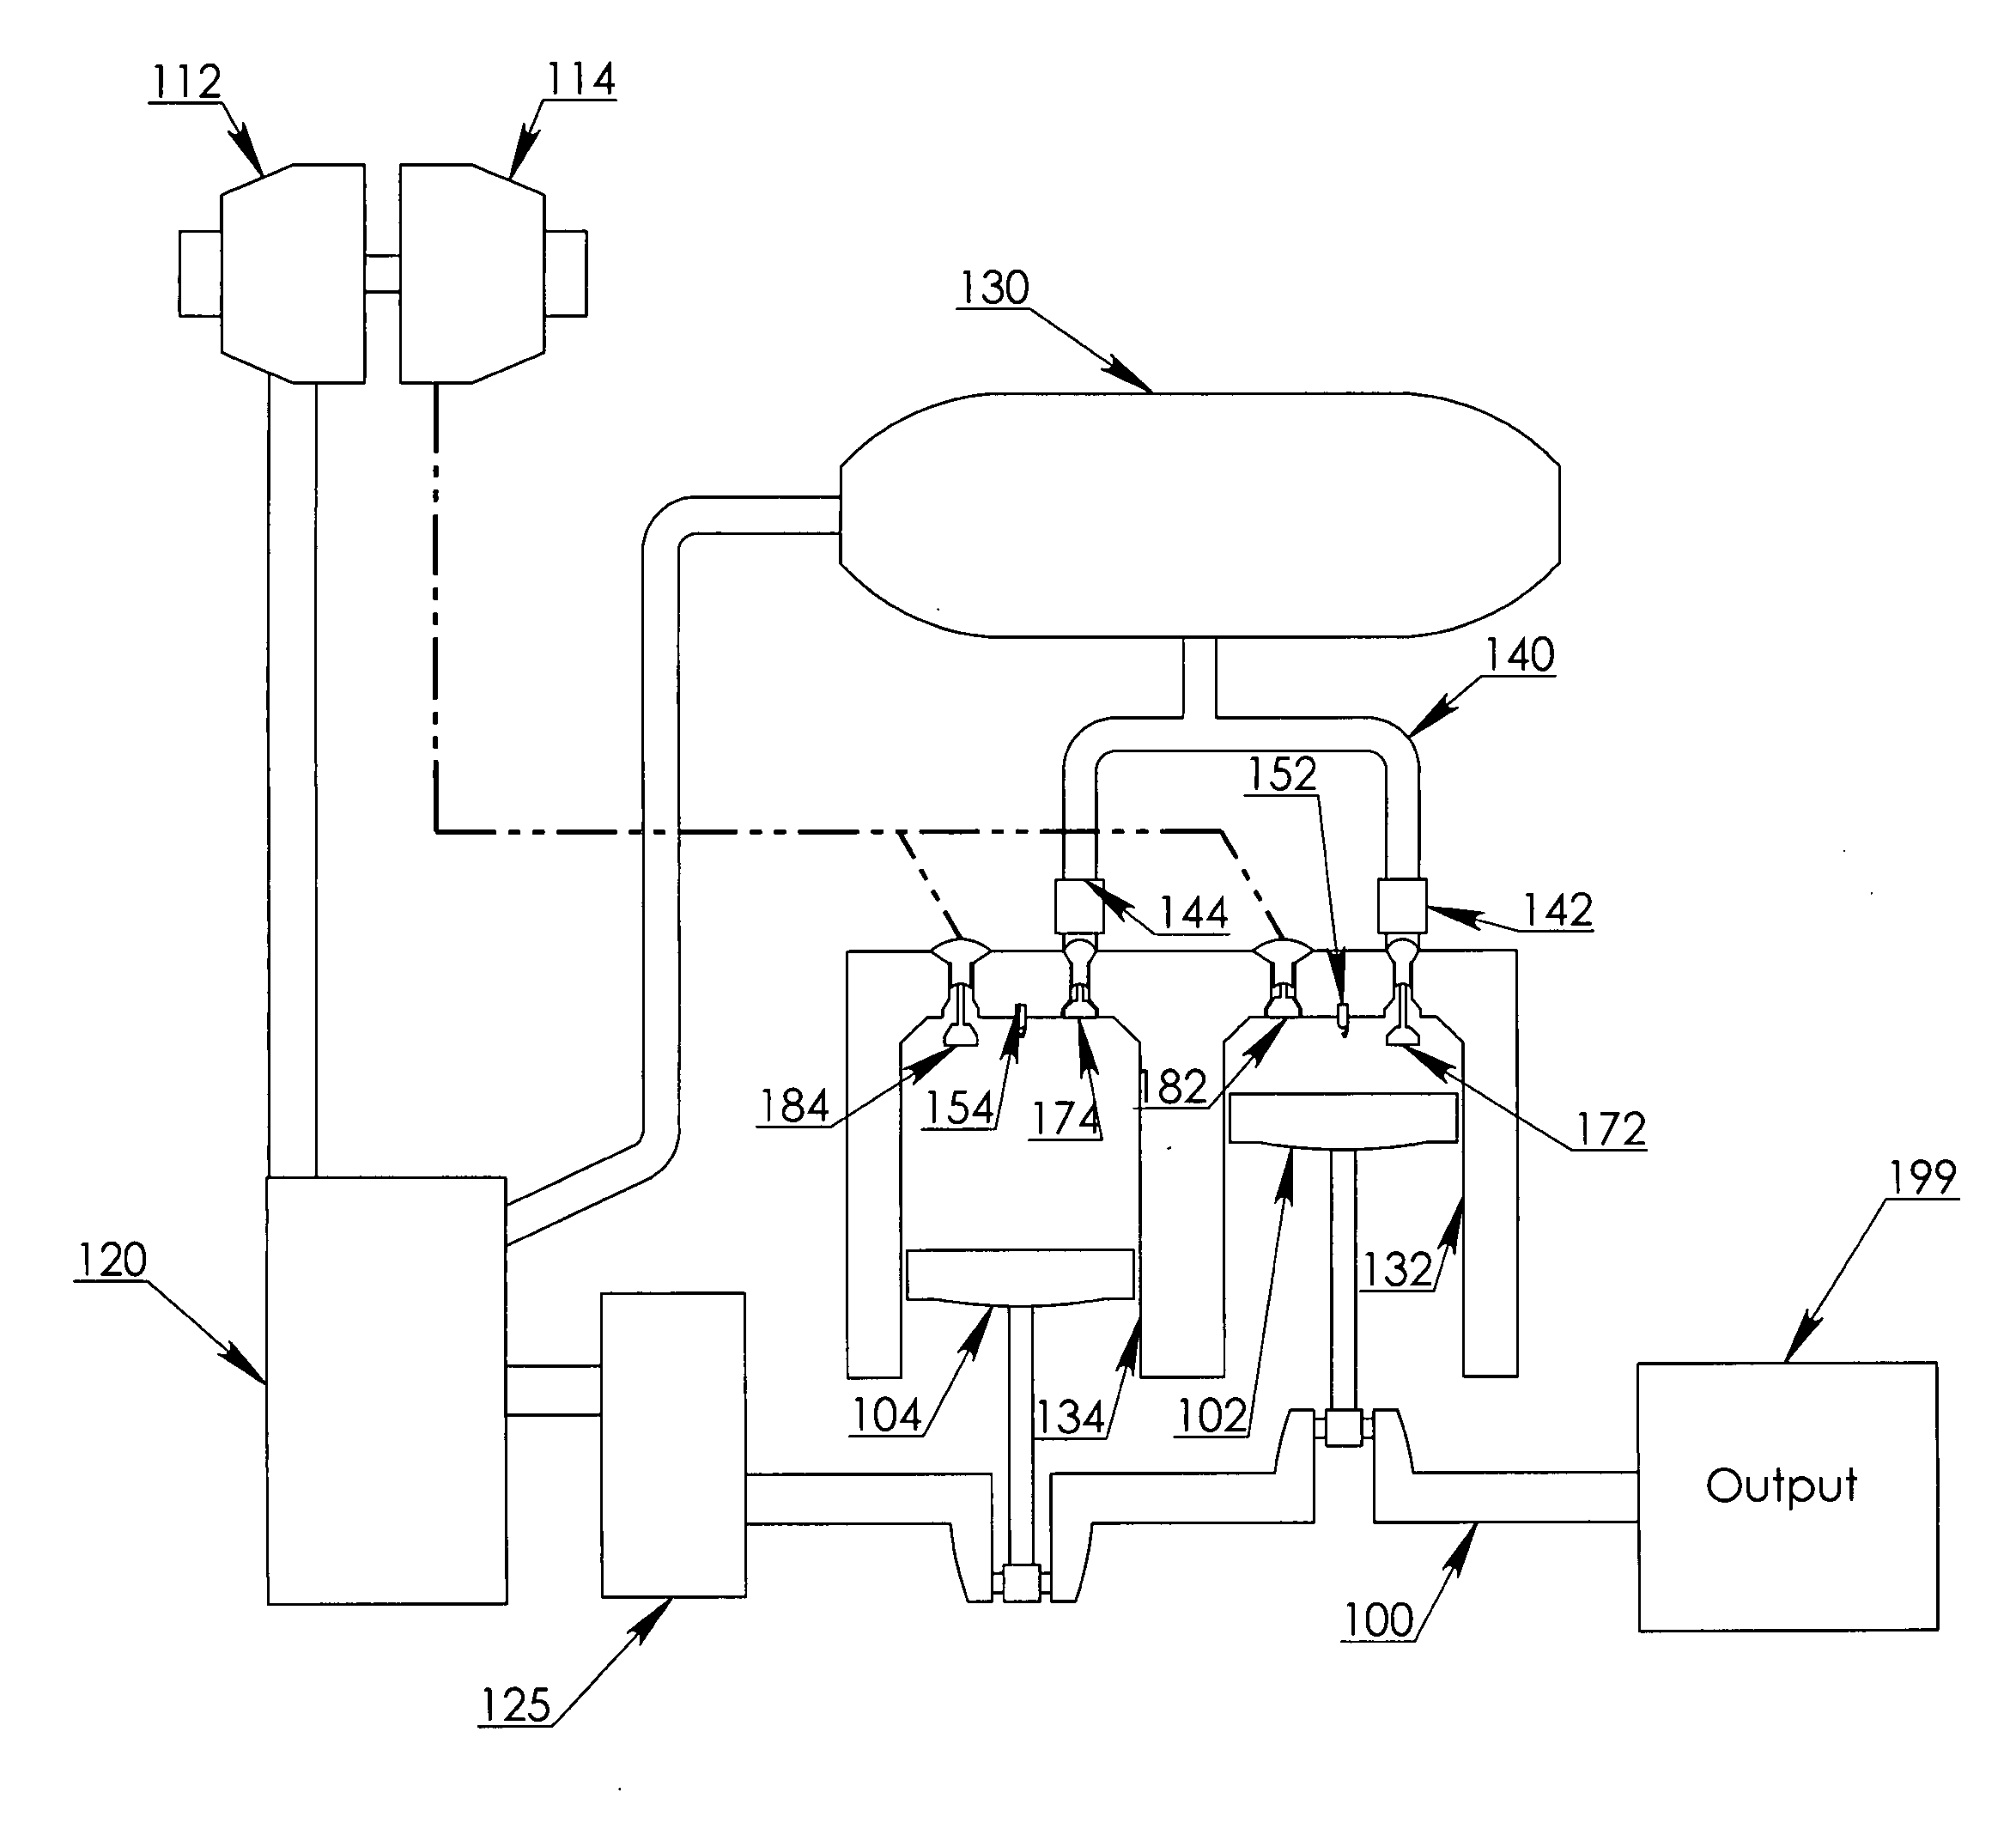 Controlled-compression direct-power-cycle engine